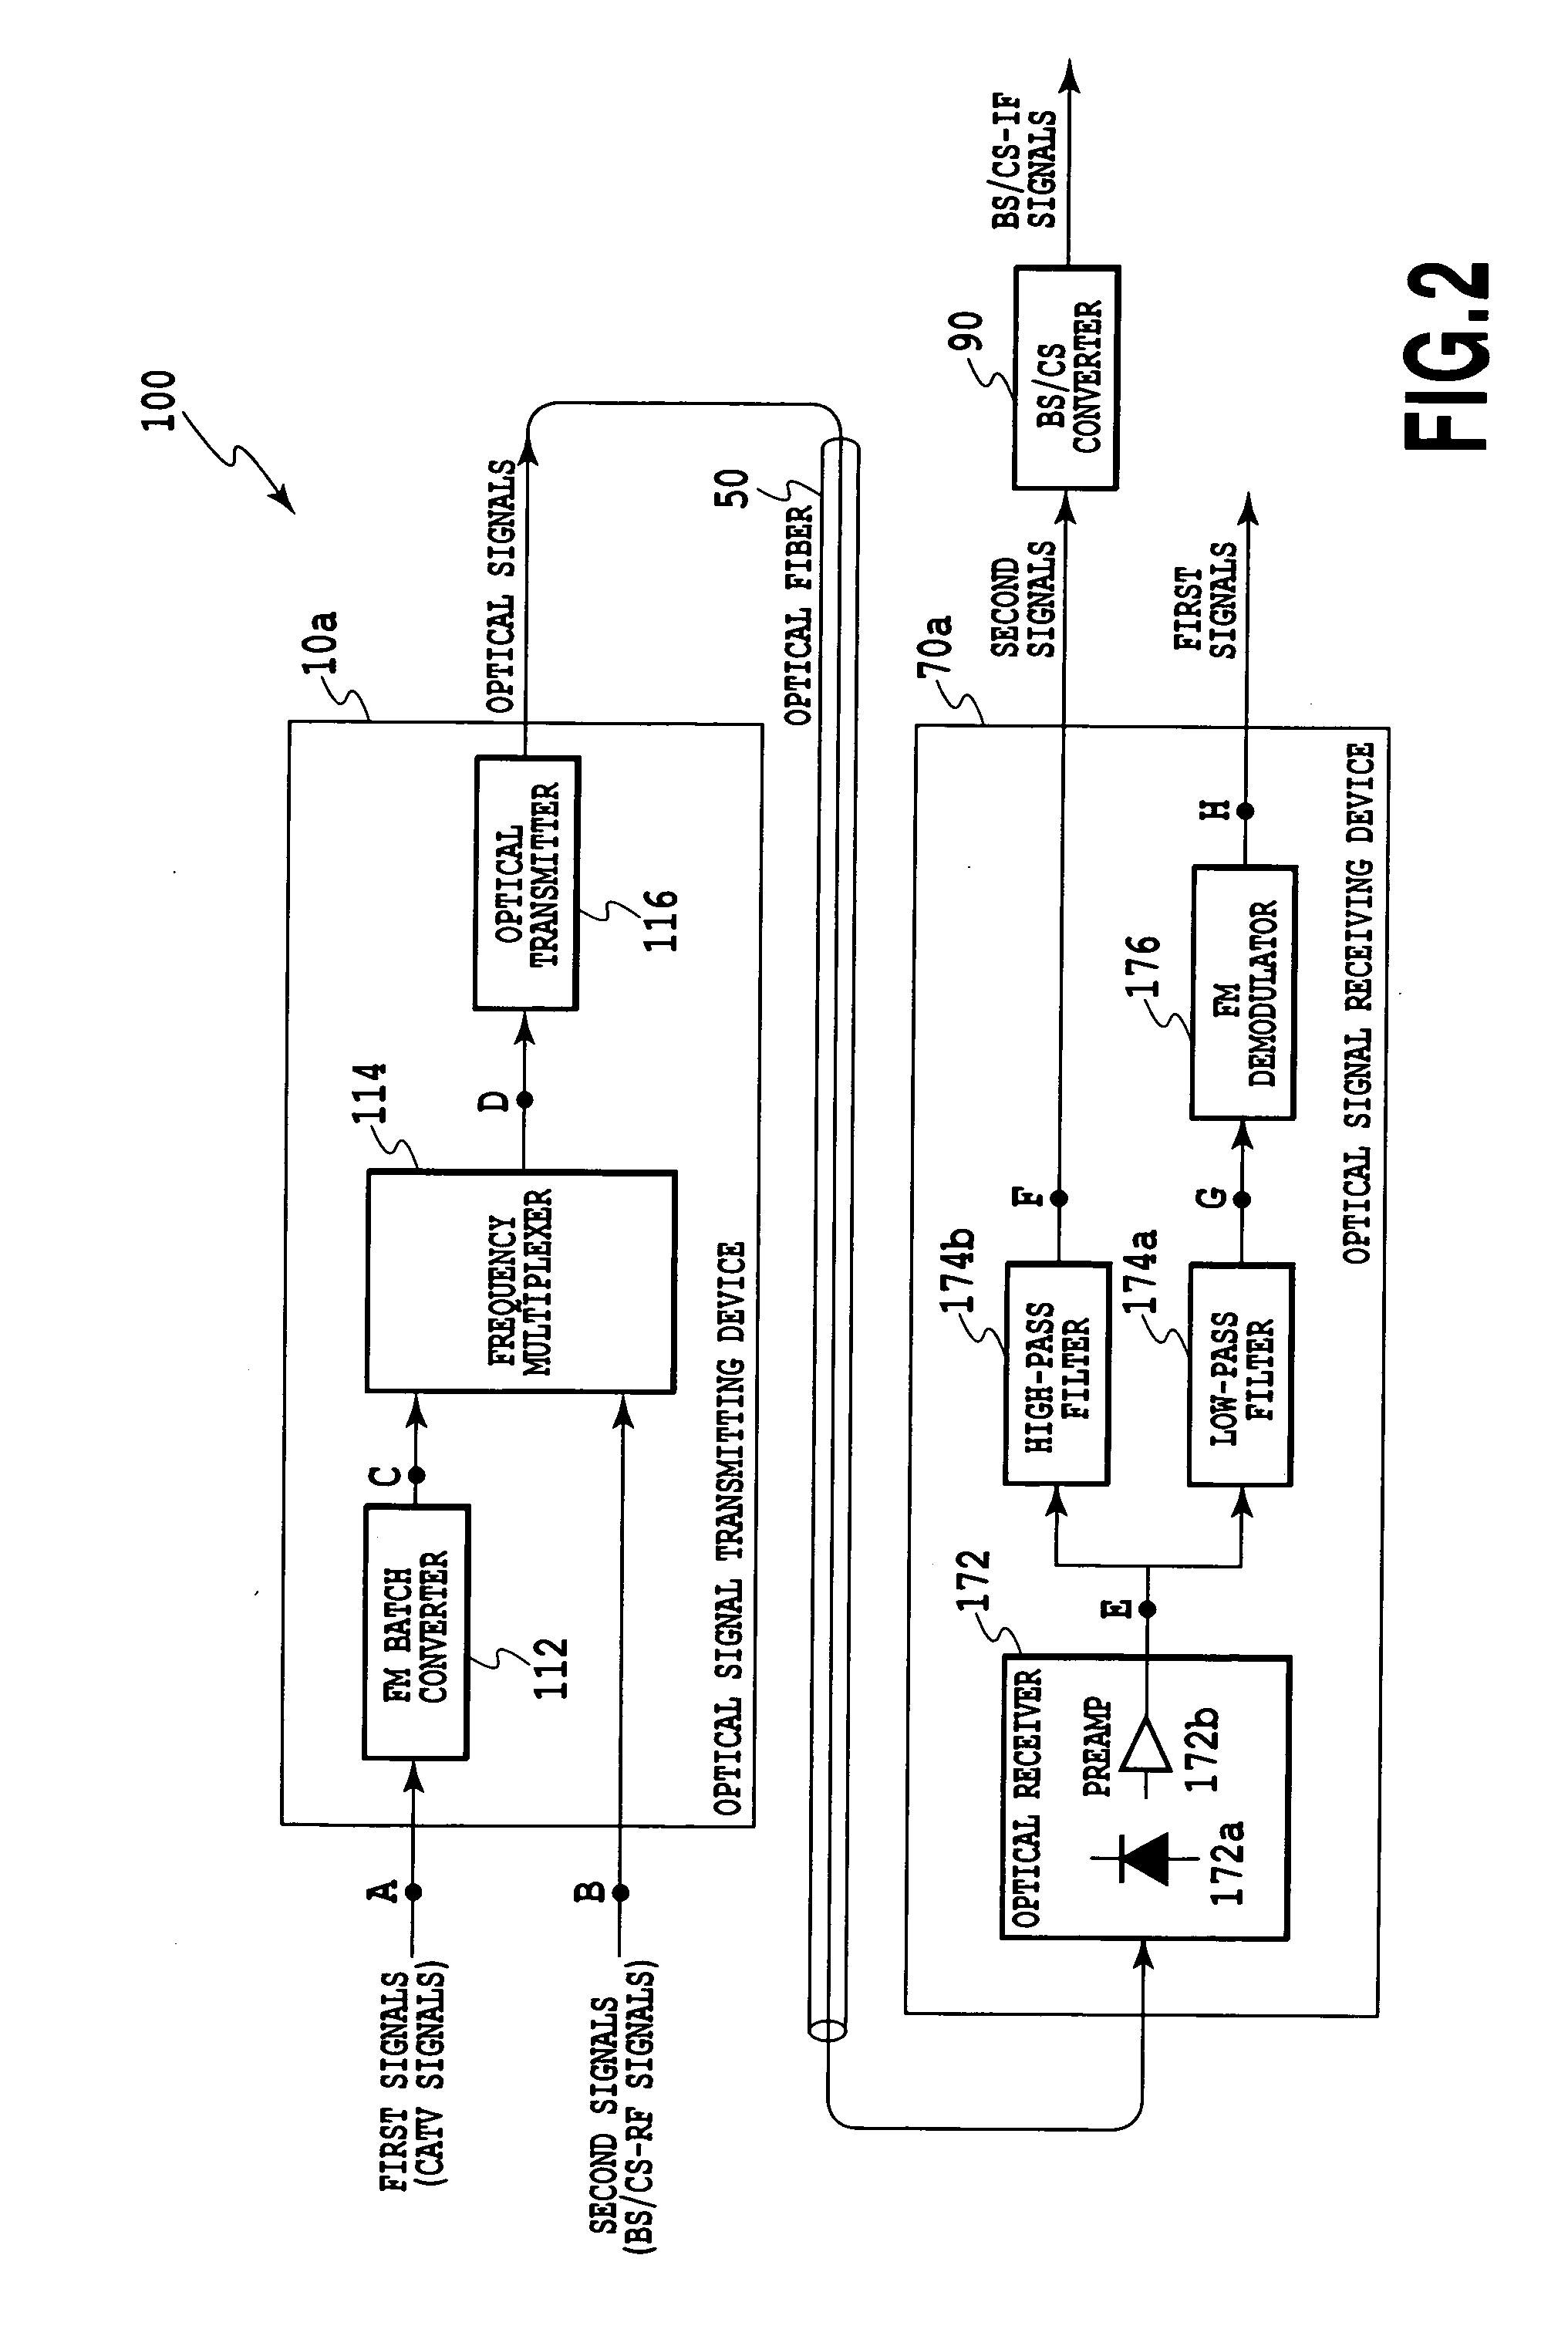 Apparatus, System And Method For Optical Signal Transmission